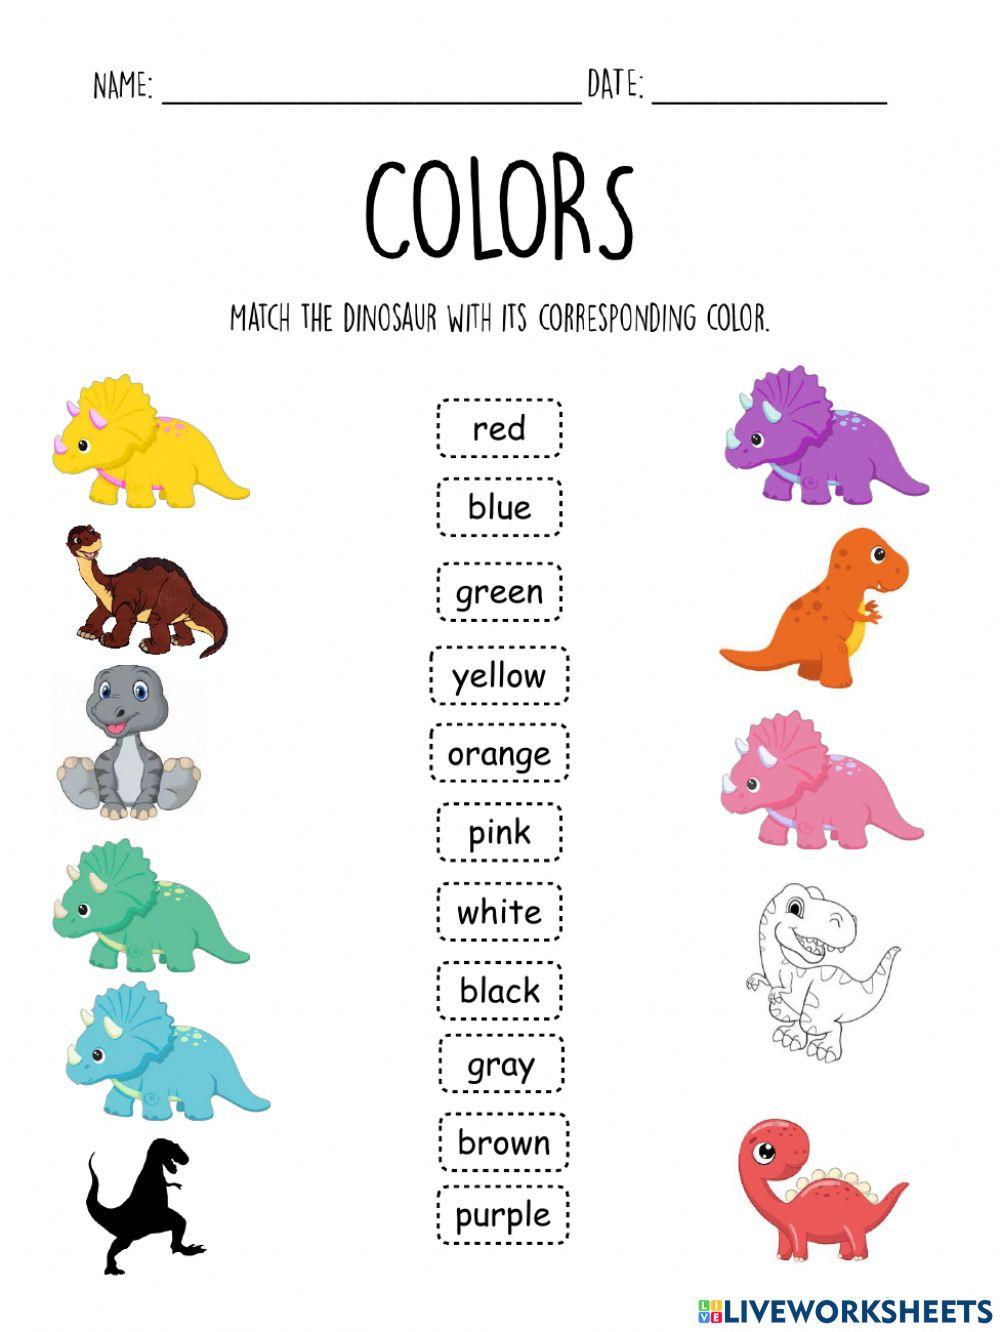 Colors in english